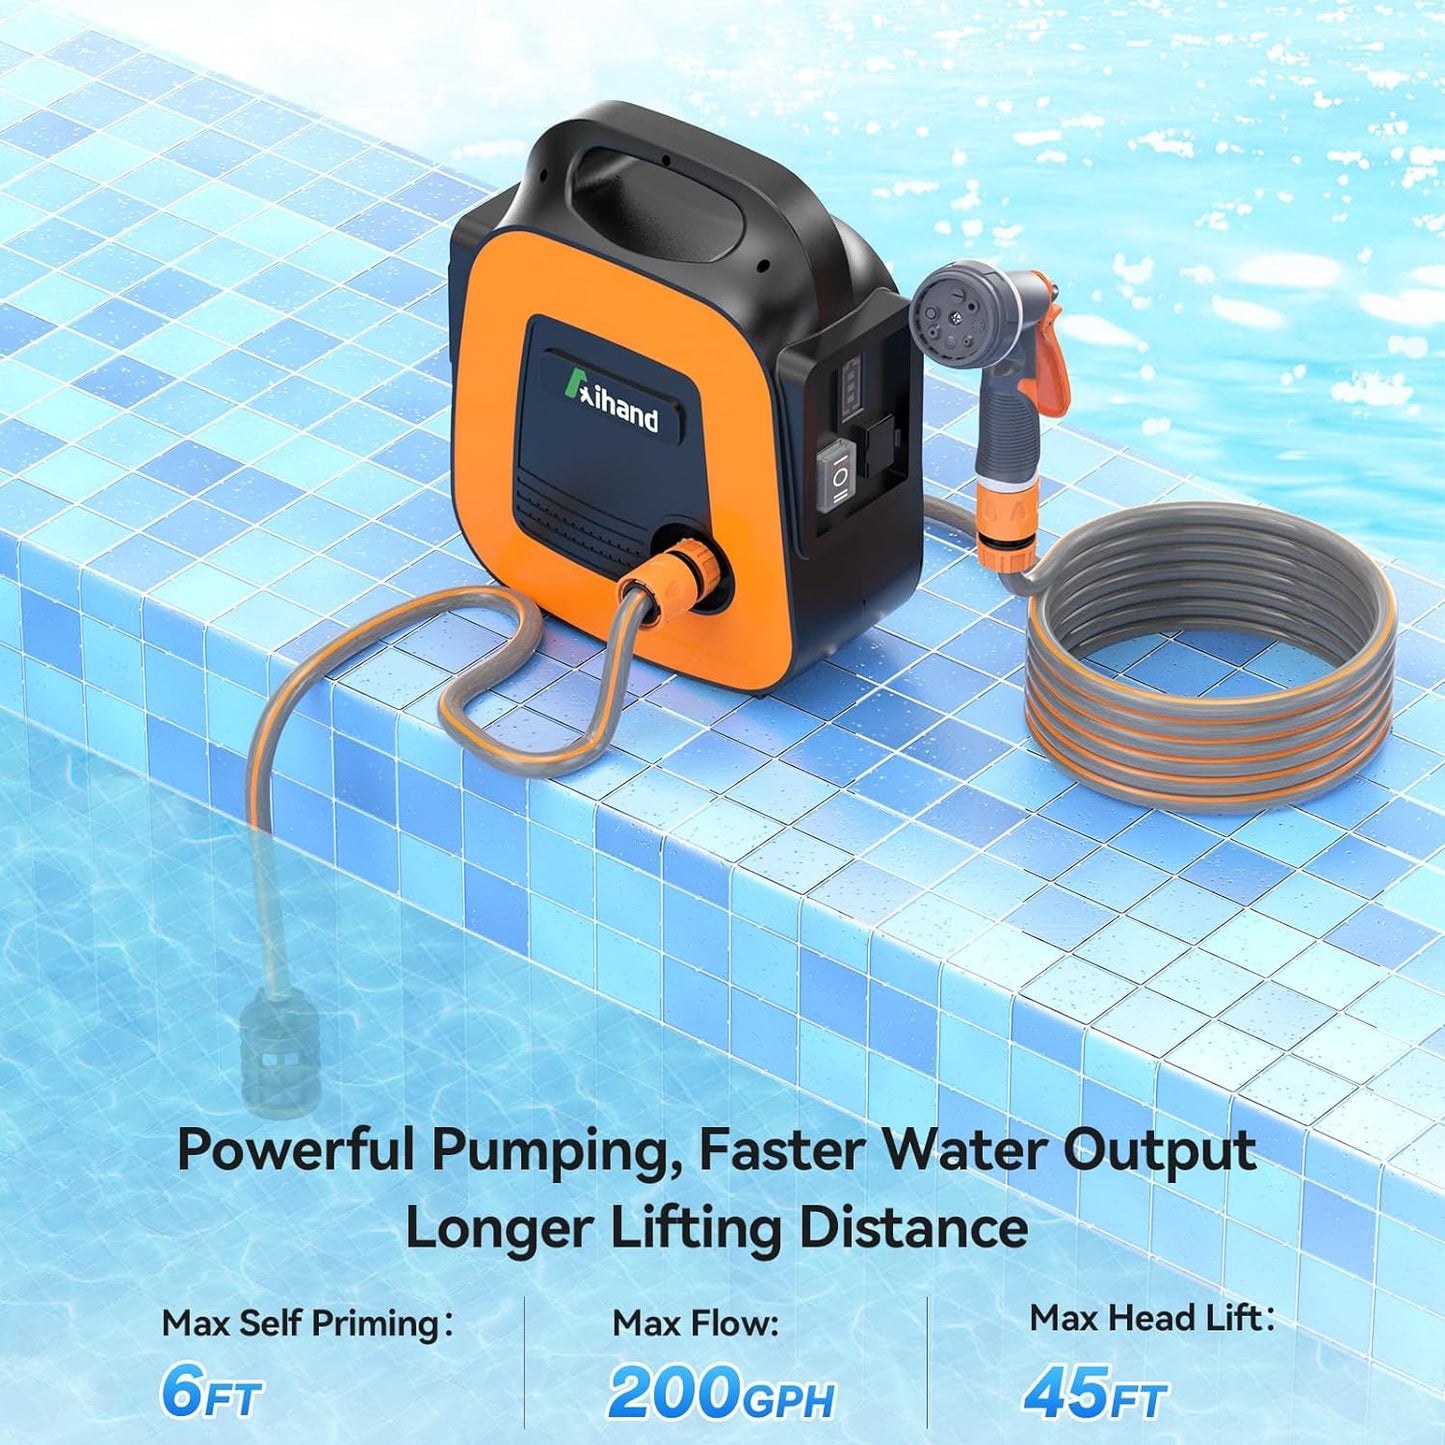 Aihand Cordless Electric Utility Pump